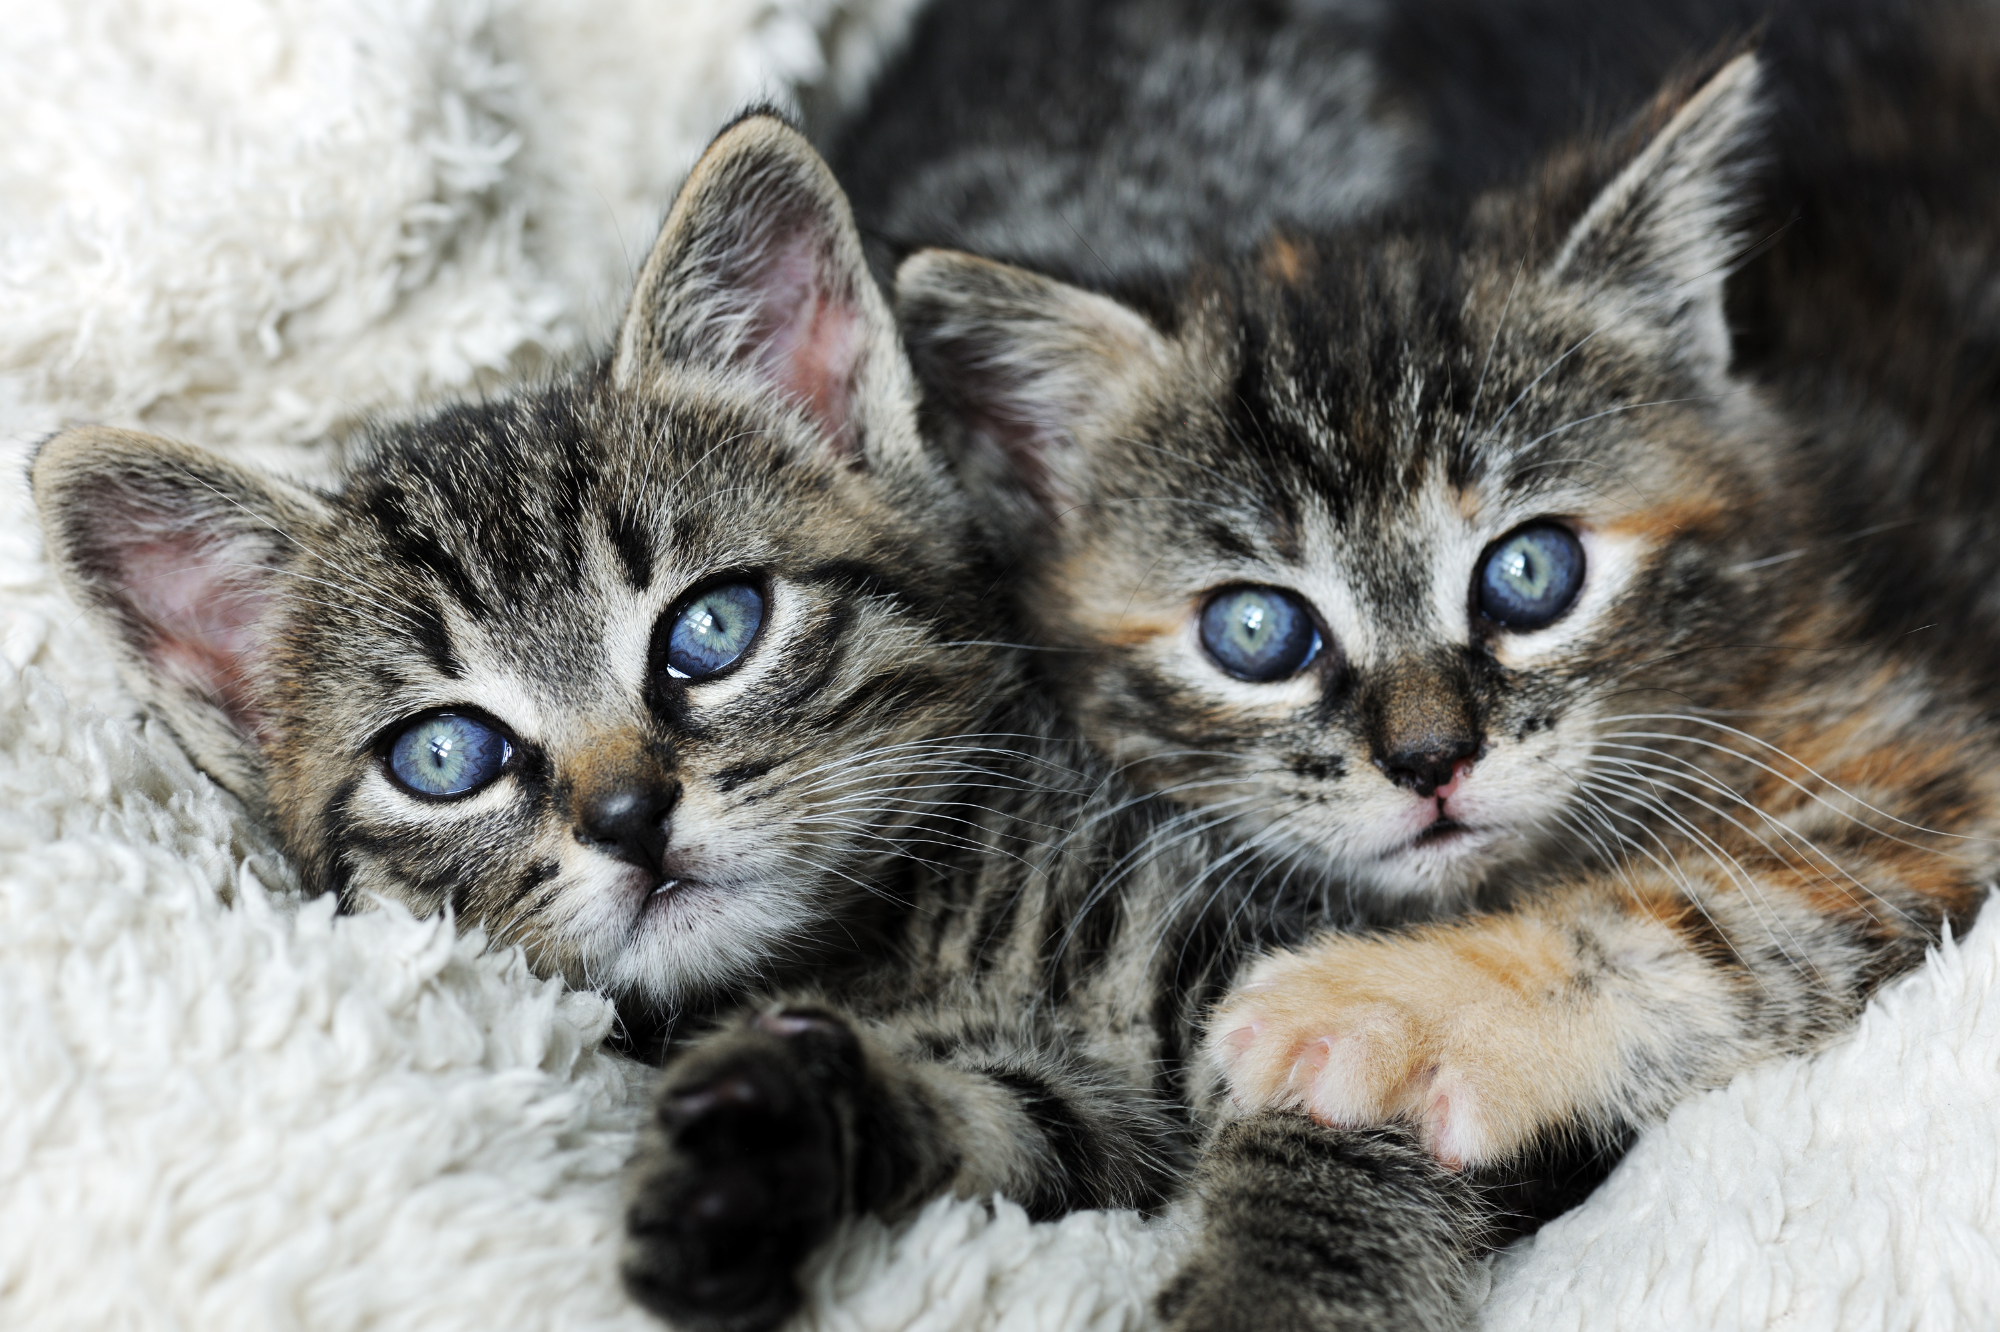 Two tabby kittens with grayish-blue eyes on a gray blanket.